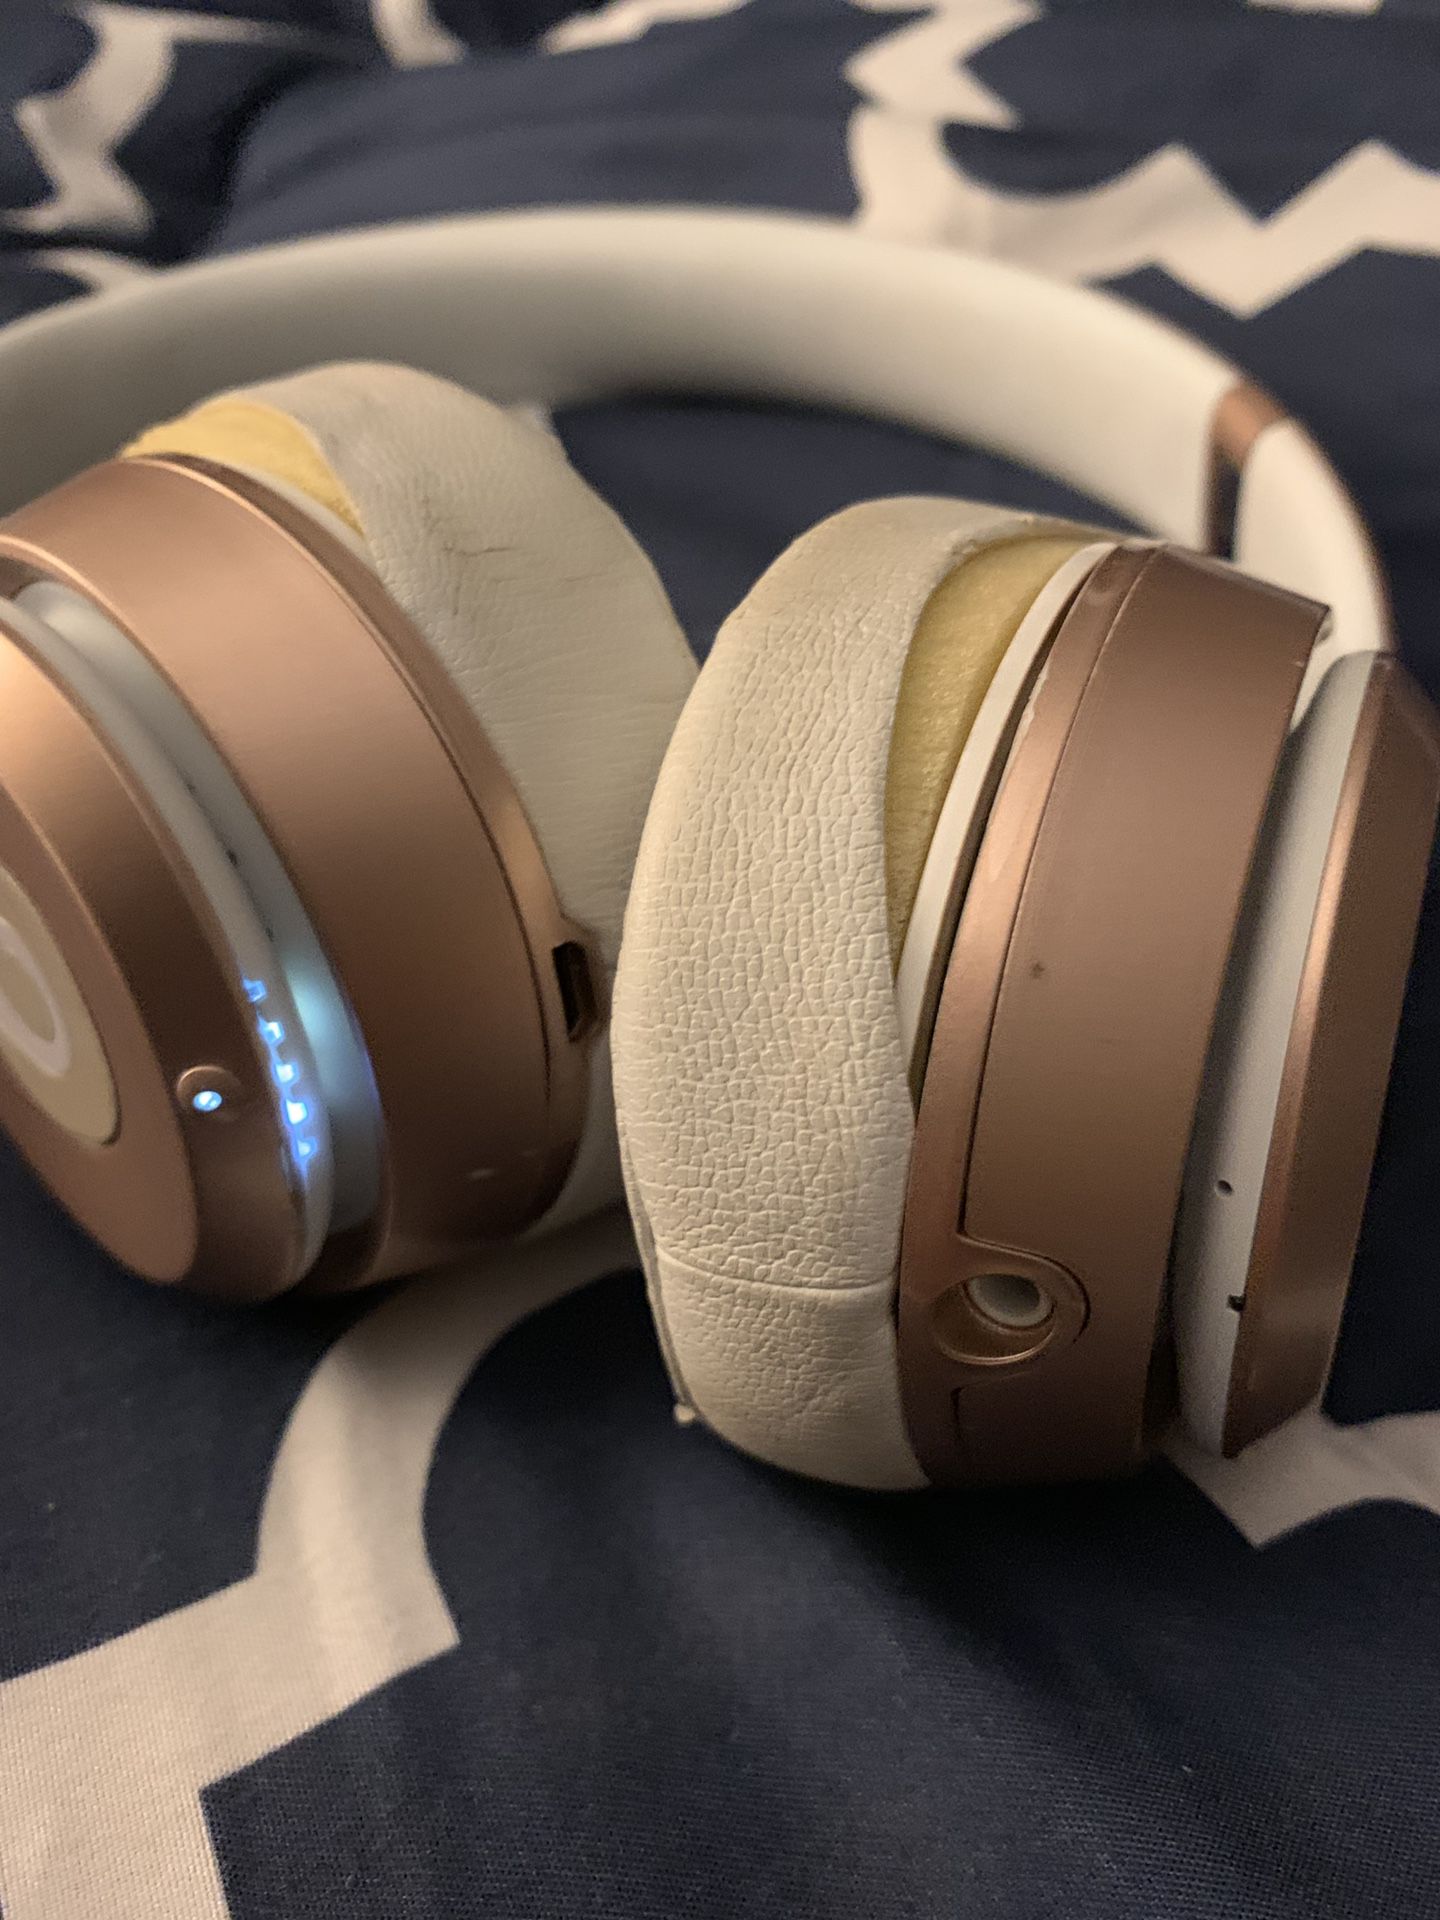 Special Edition Rose Gold Beats by Dre! Retail for $329 new!